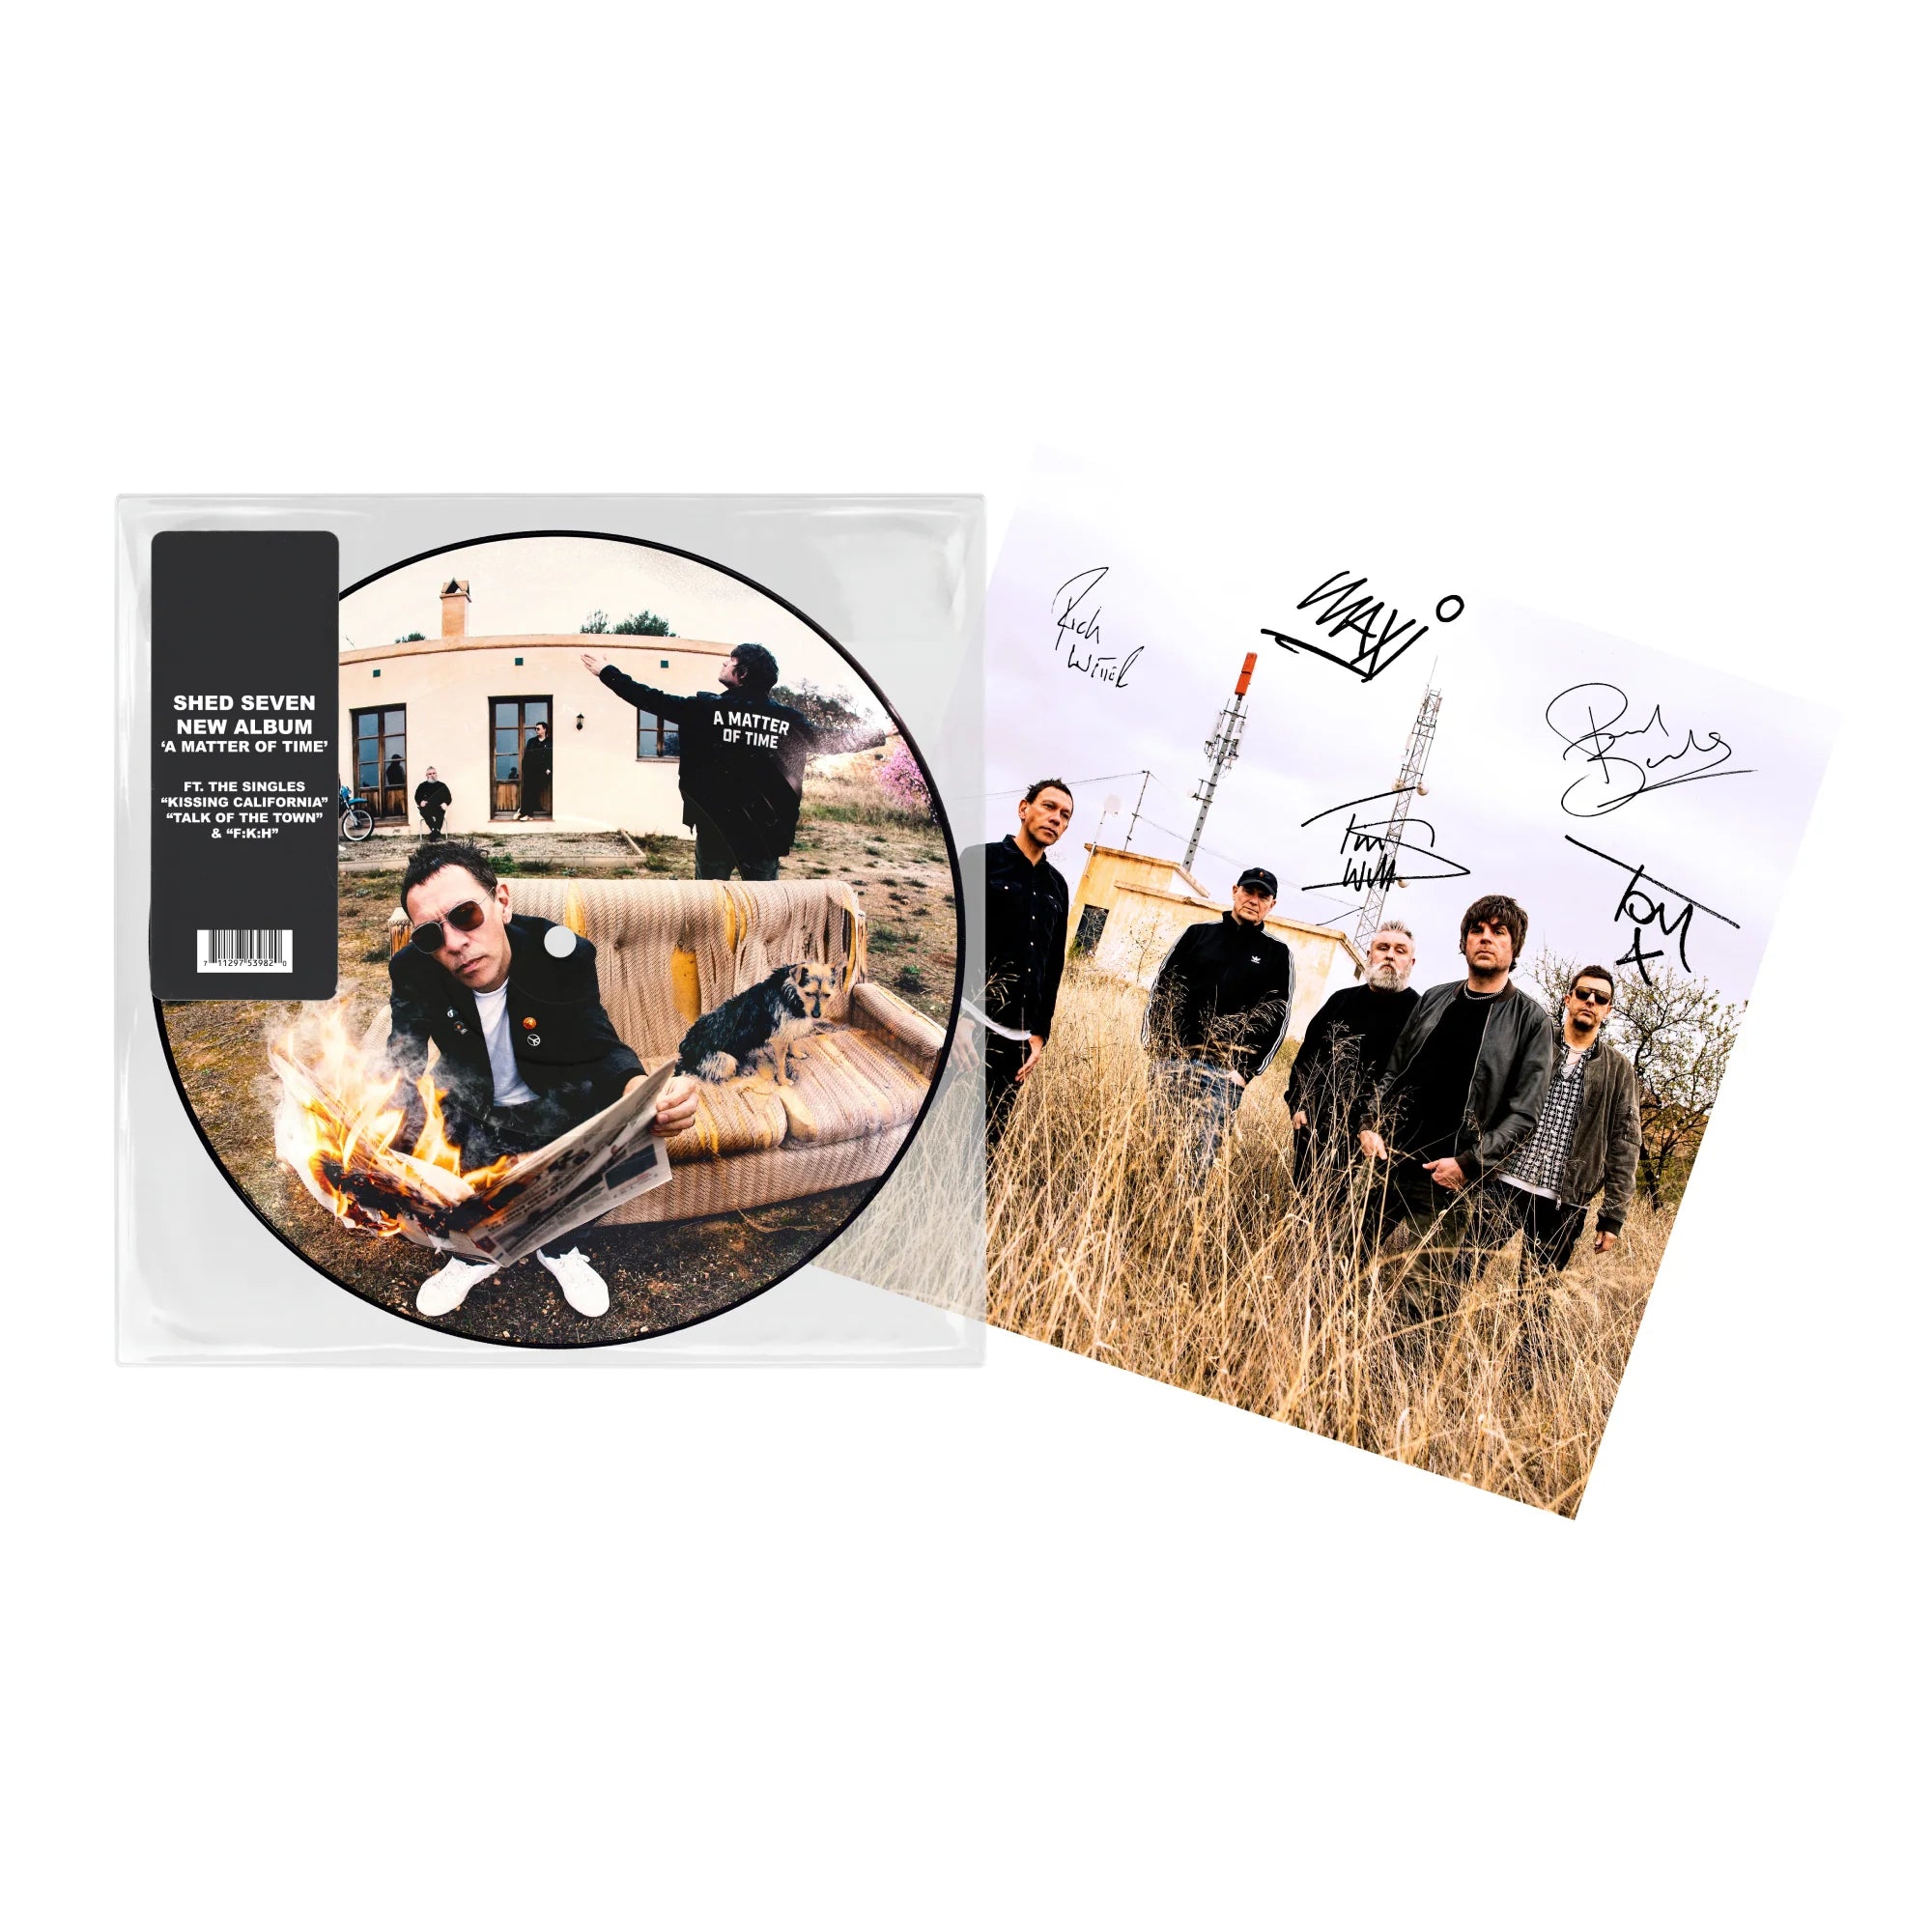 A Matter of Time: Limited Picture Disc Vinyl LP + Signed Print